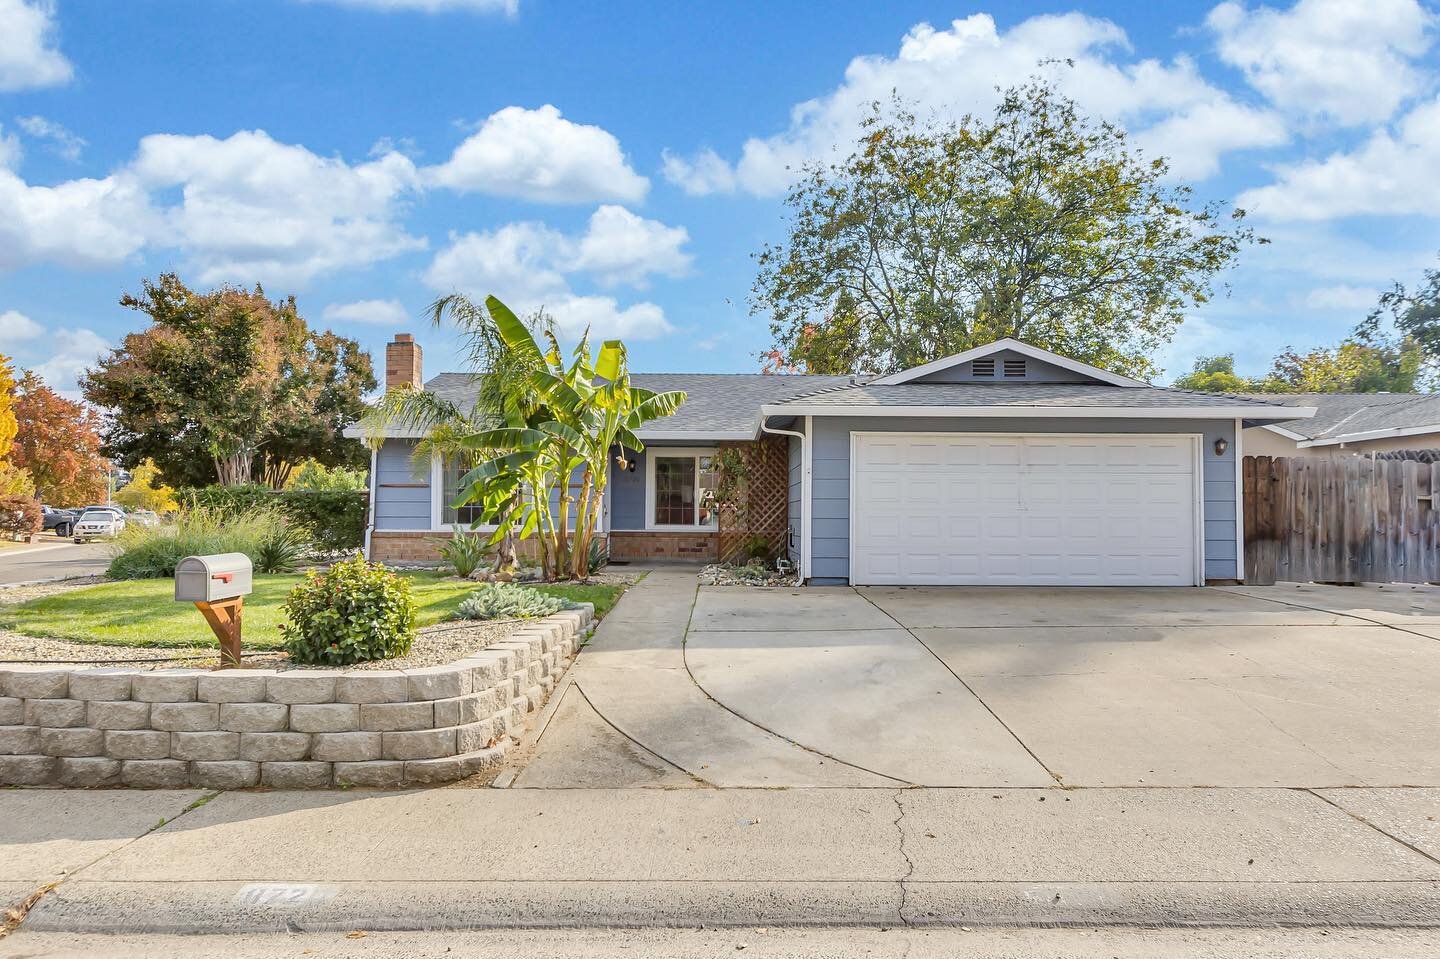 NEW LISTING 📍

8720 Barracuda Way

We are pleased to bring this home onto the market! Located in the Glenbrook area of Sacramento, this property is situated on a large corner lot. 
This home is also equipped with a lengthy list of improvements that 